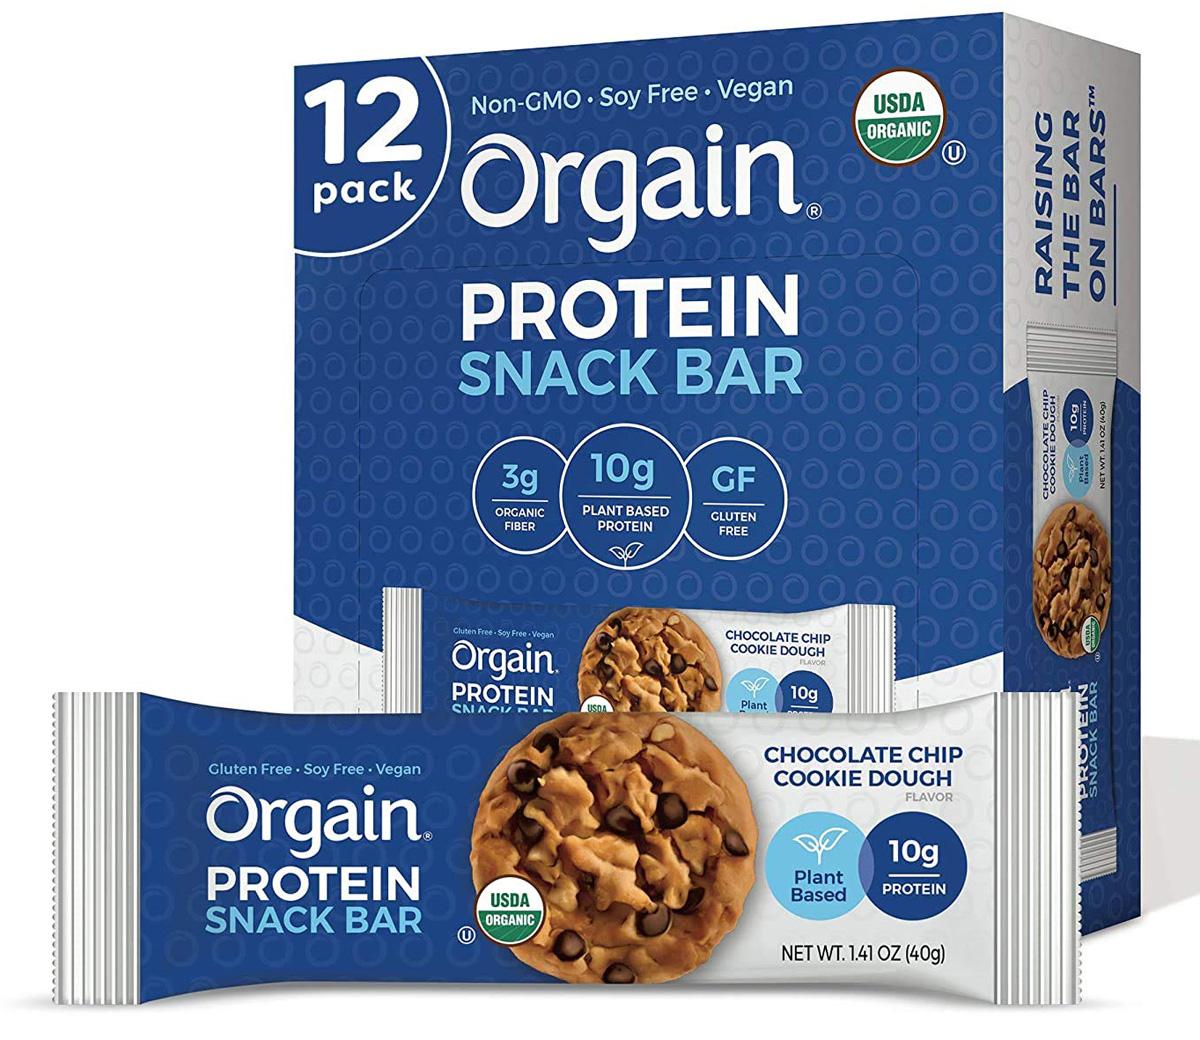 12 Orgain Organic Plant Based Protein Snack Bar for $8.60 Shipped